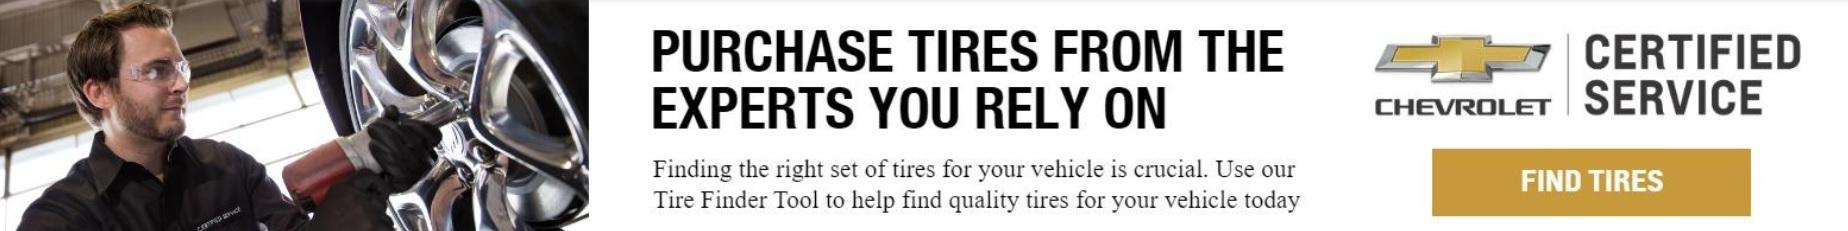 Purchase Tires